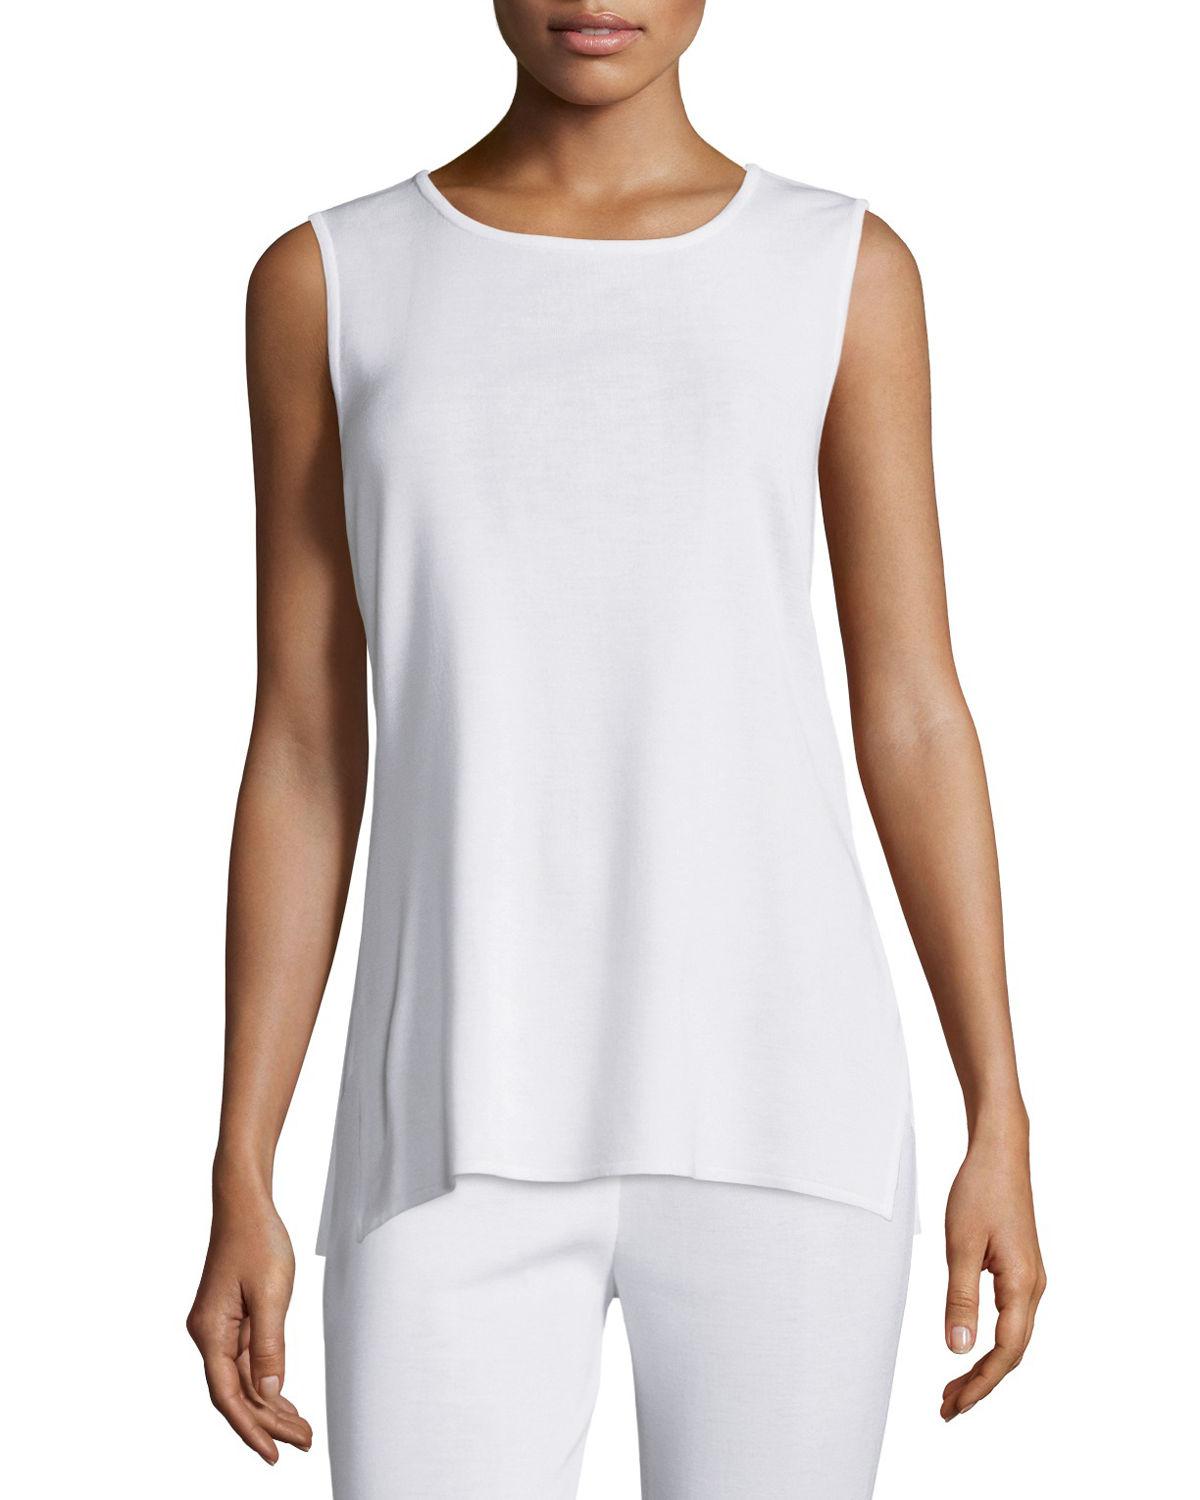 Lyst - Misook Sleeveless Long Tank Top in White - Save 11.235955056179776%